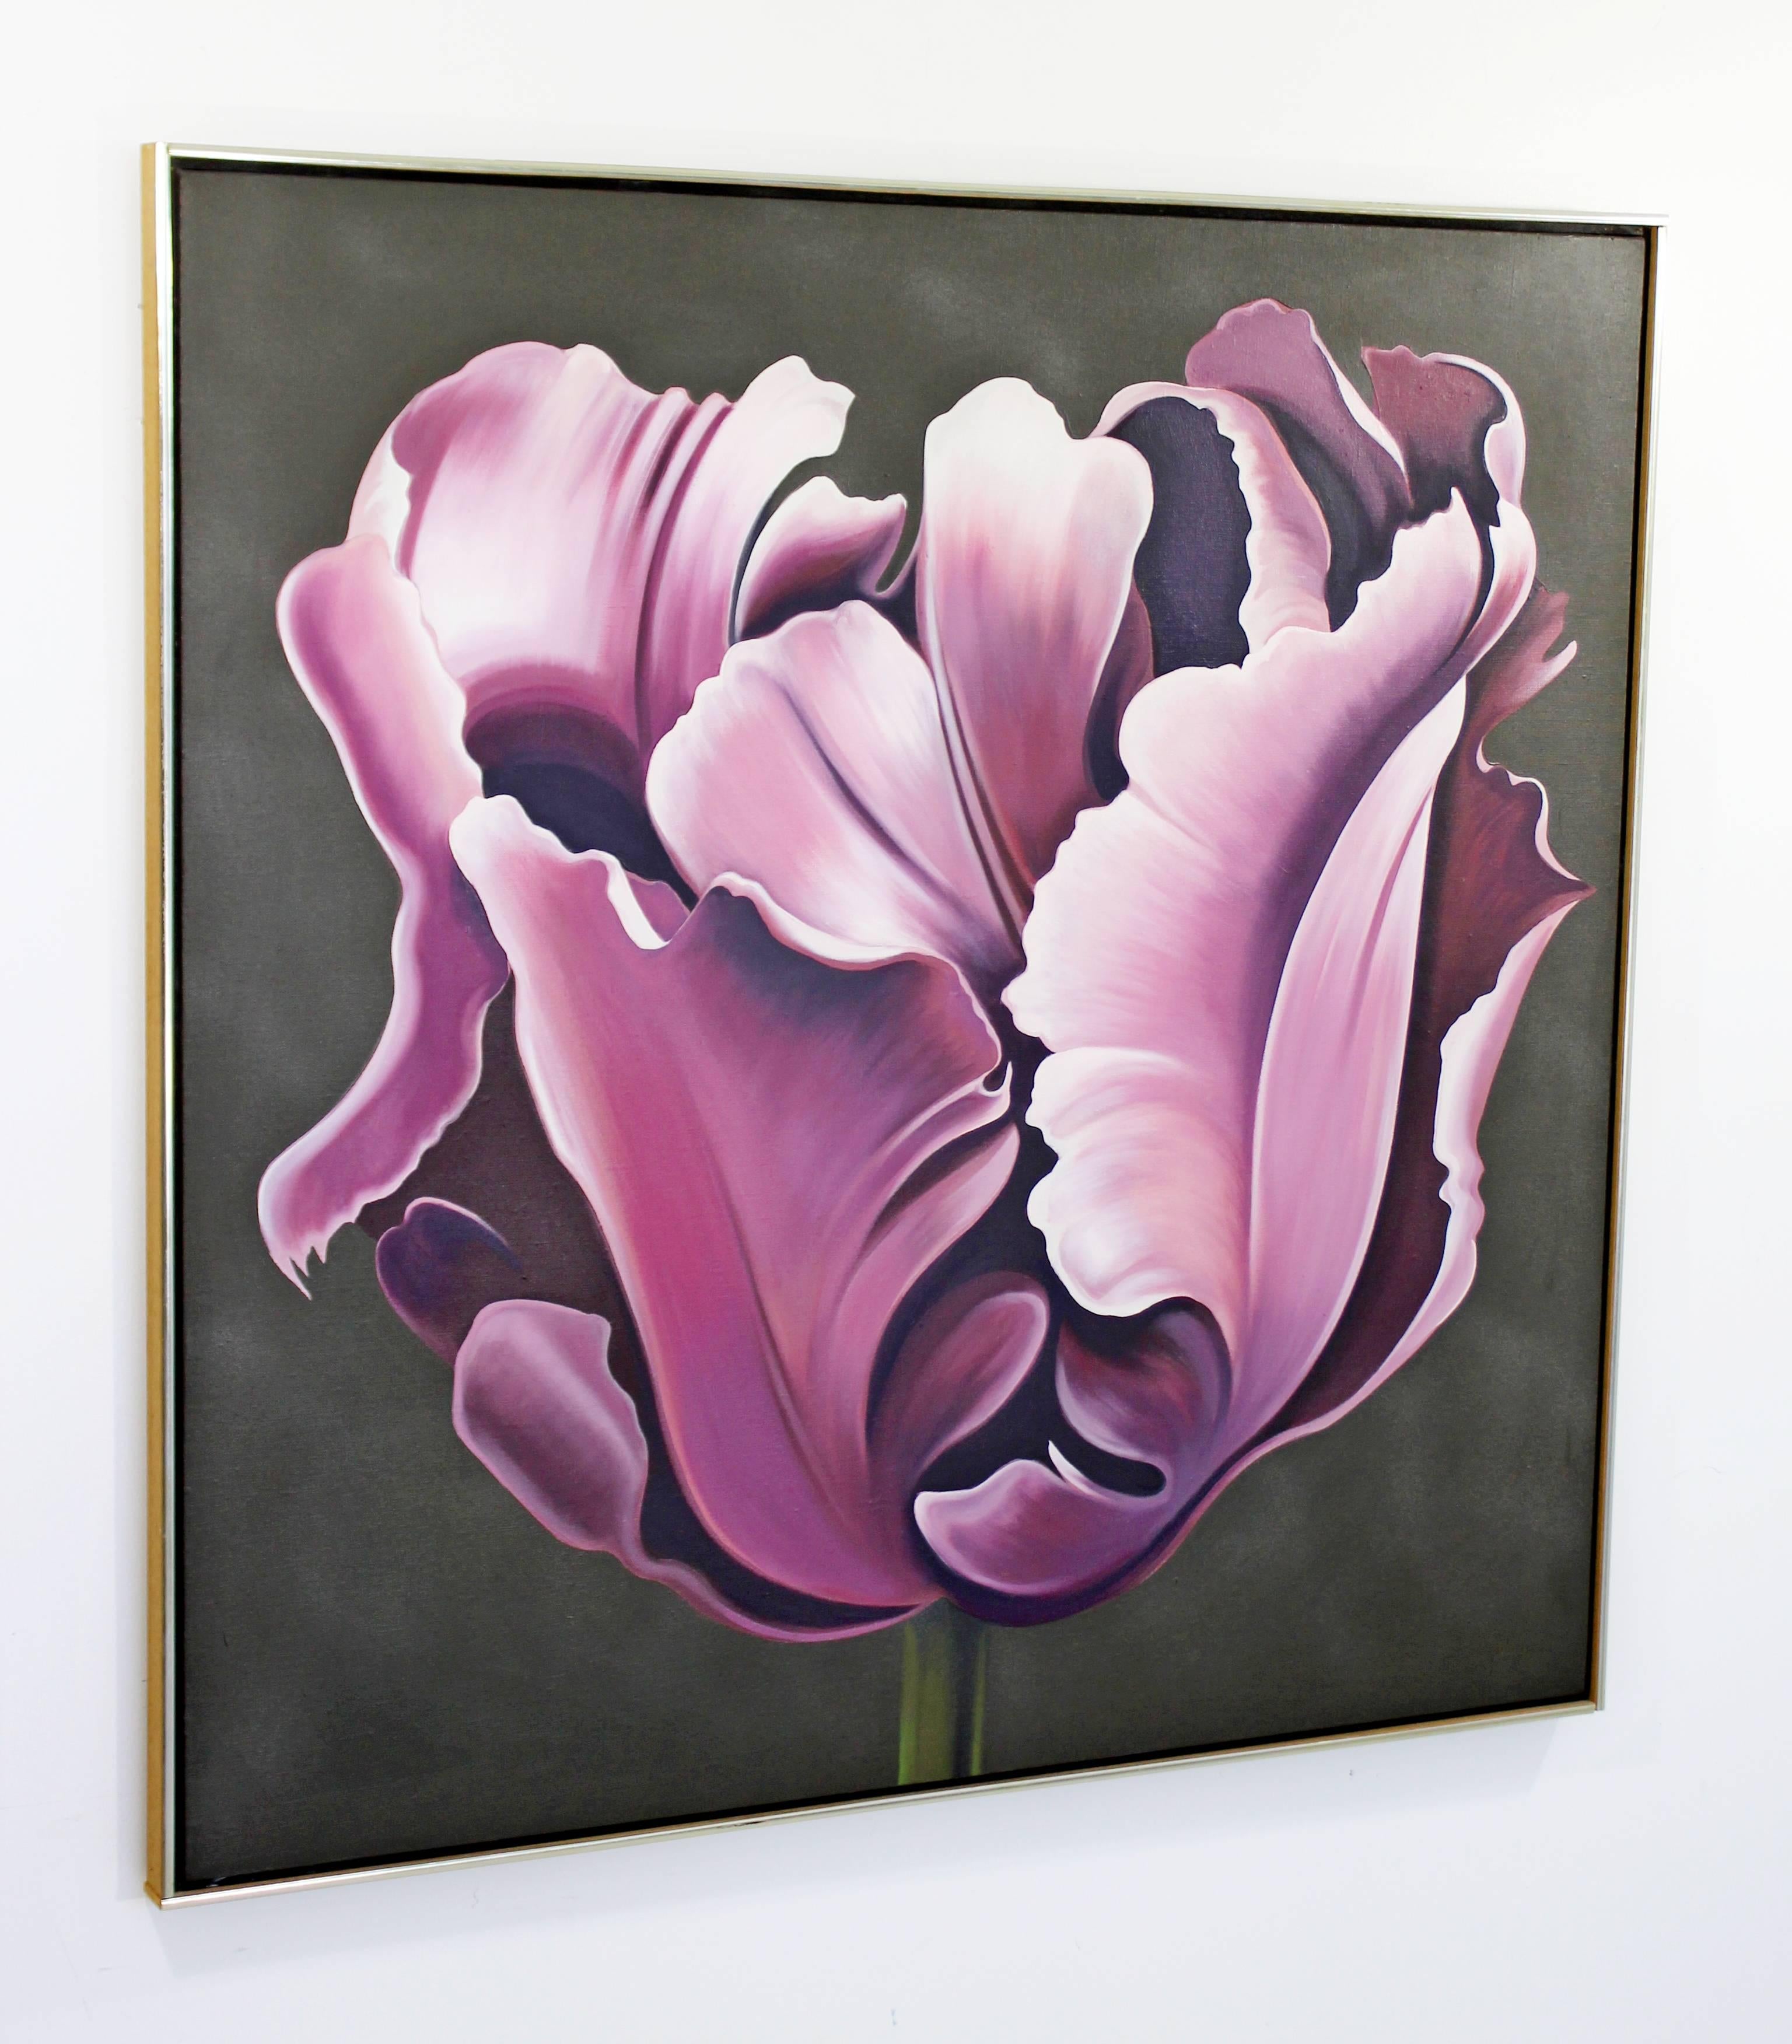 For your consideration is an incredible oil painting on canvas, signed and dated by Lowell Nesbitt, entitled Violet Parrot Tulip, circa 1974. In excellent condition. Comes with a COA from Detroit Fine Art Appraisers. The dimensions are 41